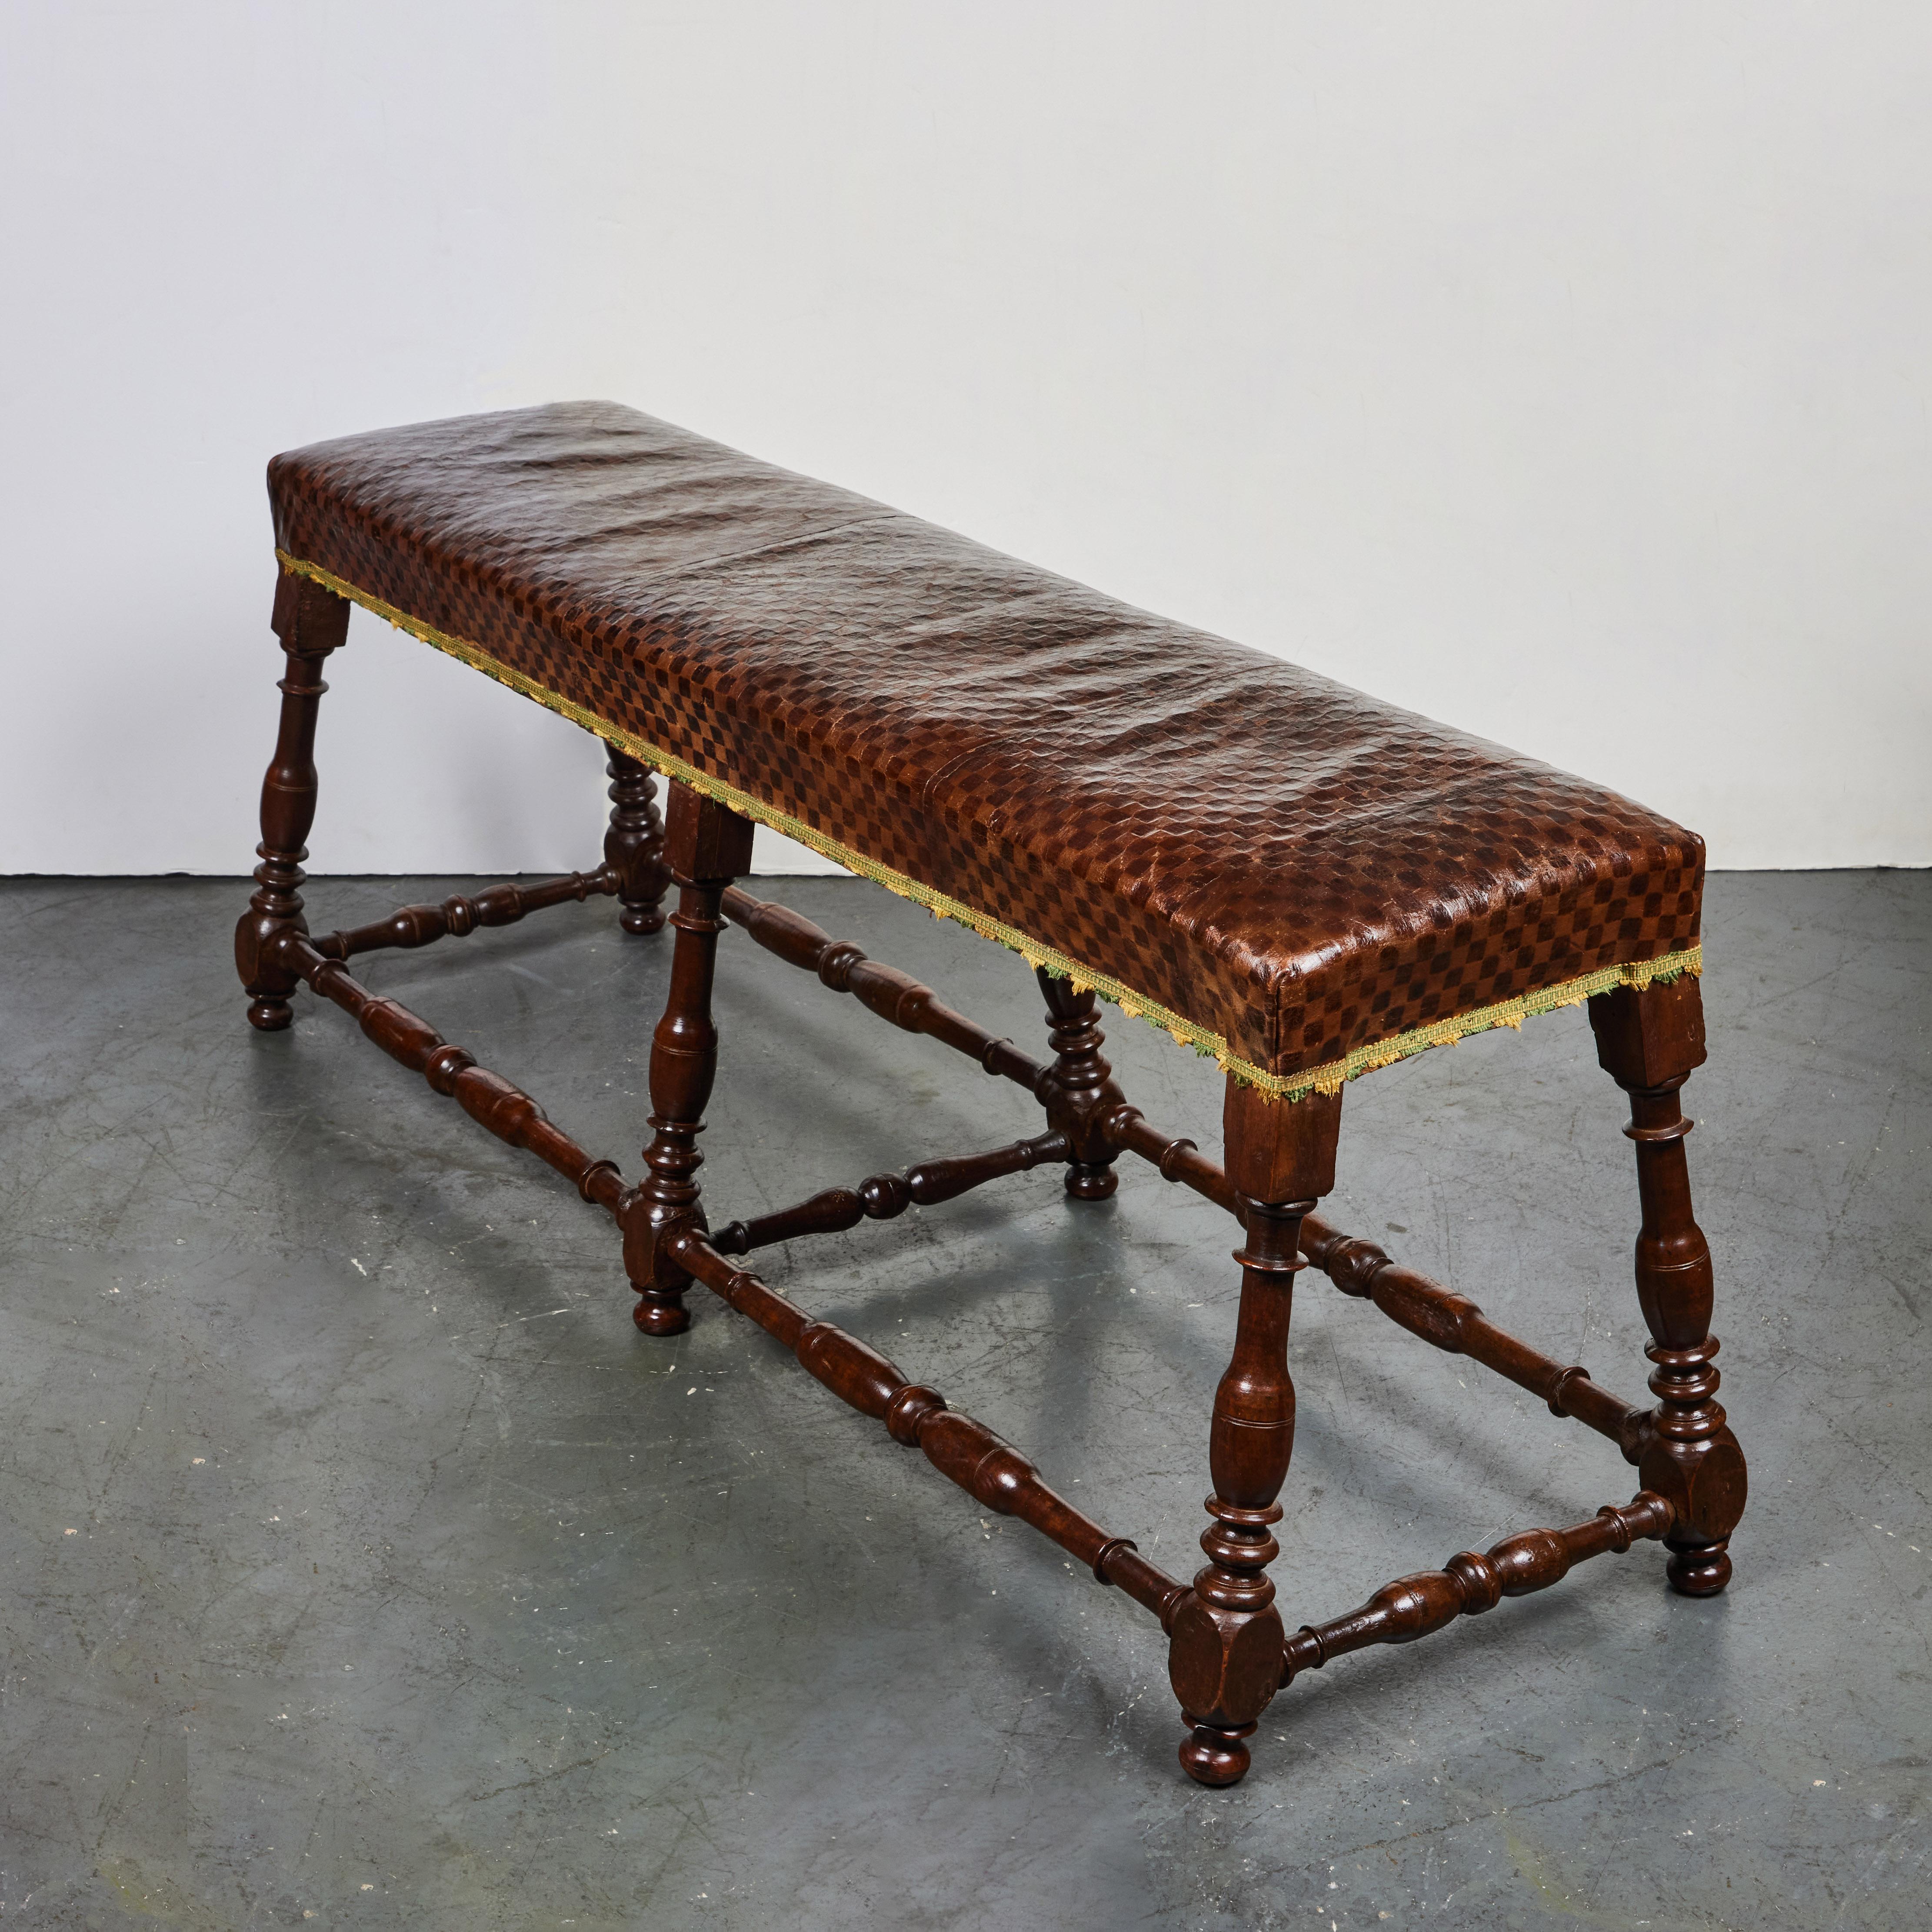 A hand carved walnut bench with 2 stretchers, checkered patterned leather and finished with woven trim.  From the area of Tuscany.